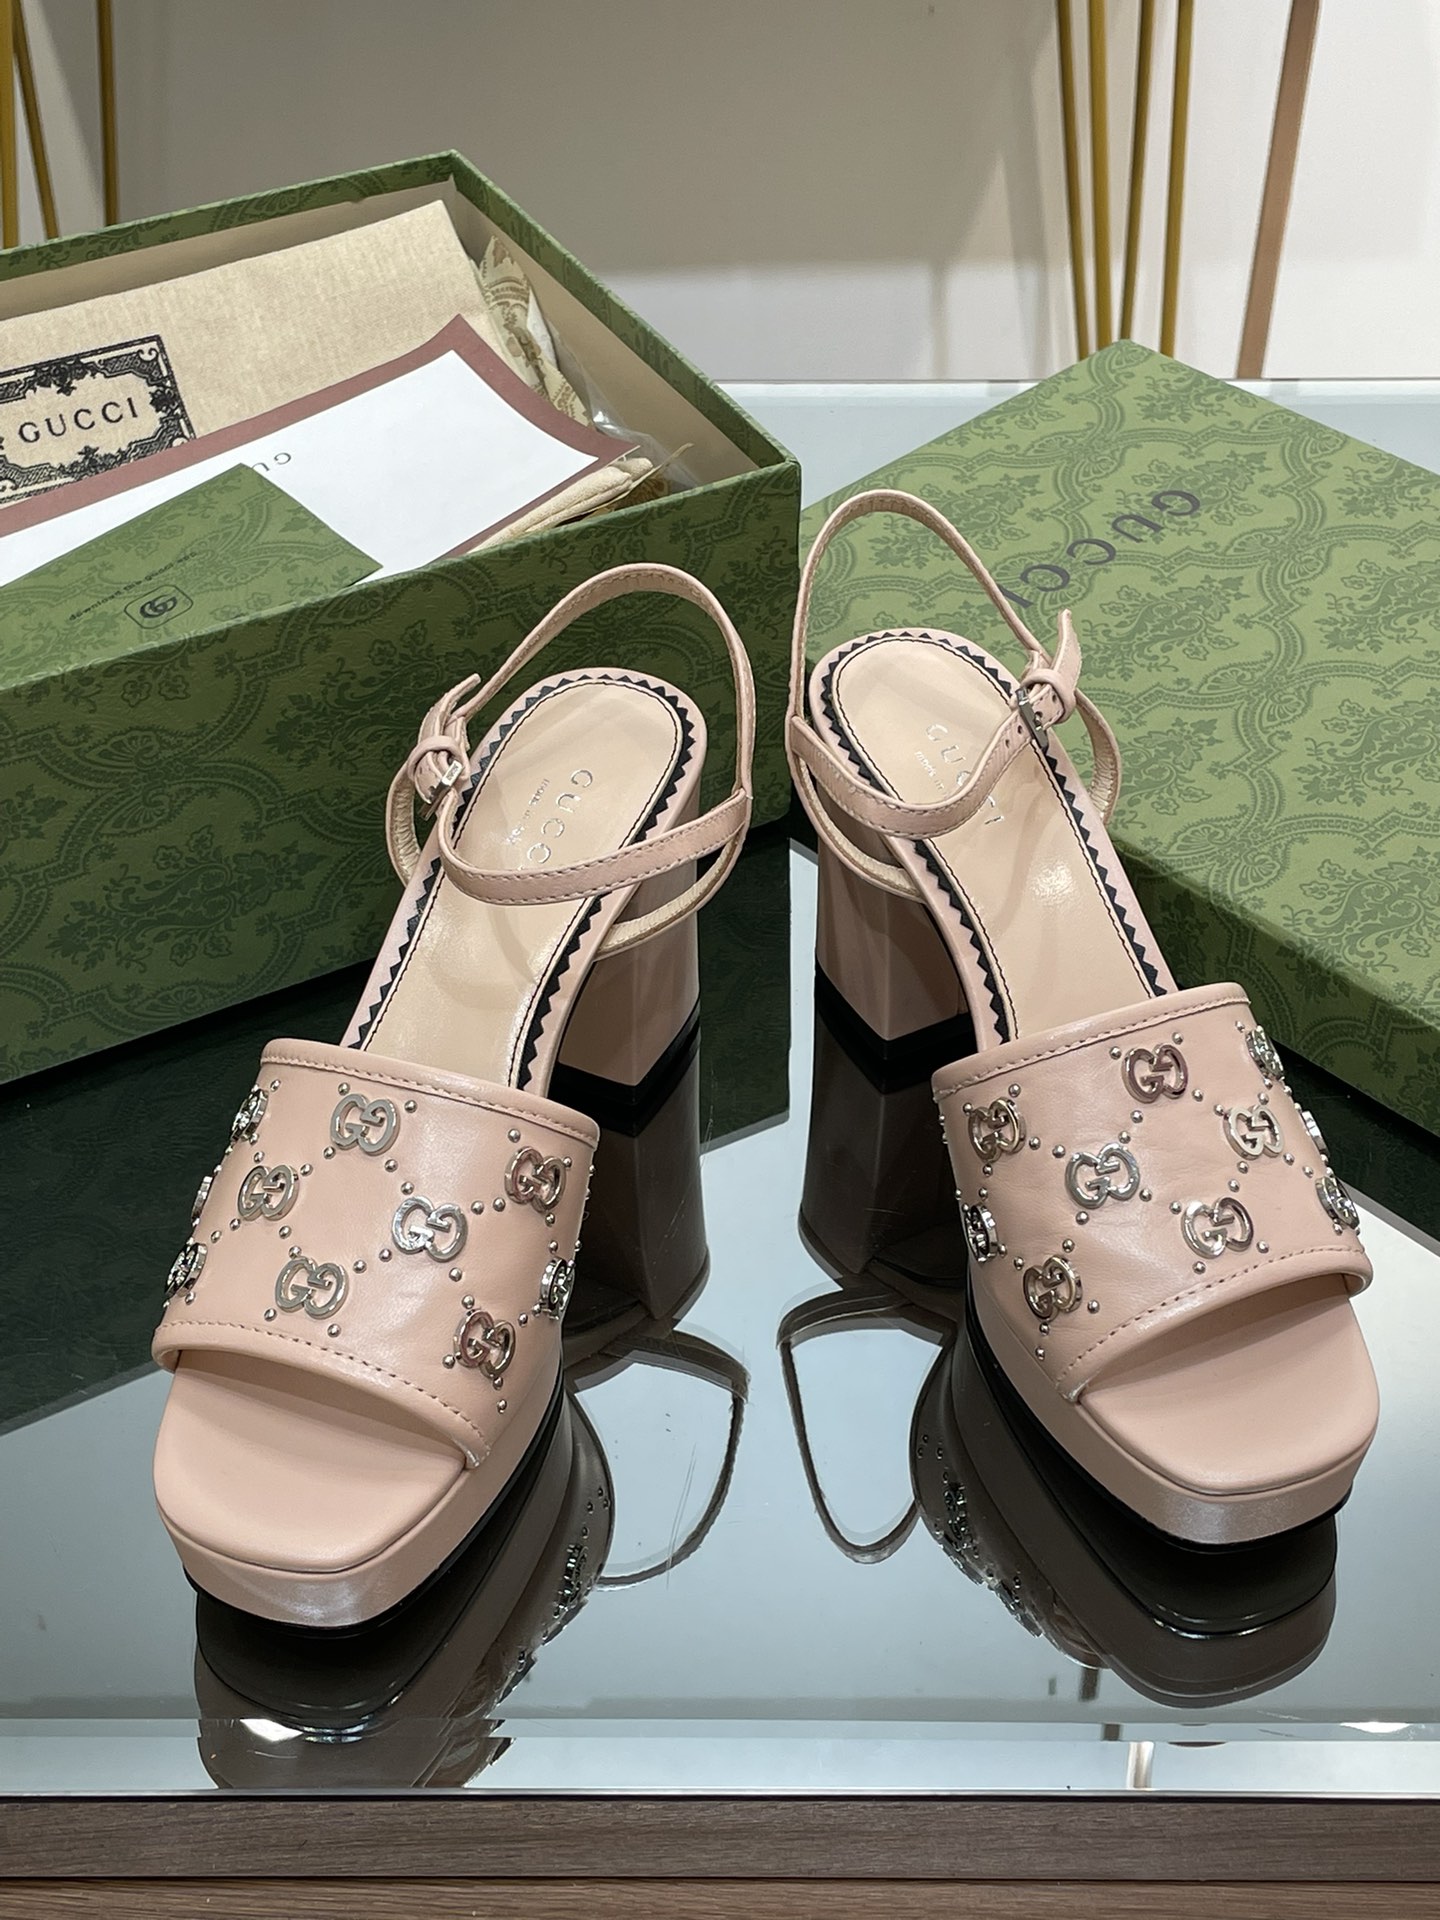 Gucci Shoes Sandals Green Genuine Leather Sheepskin Spring Collection Fashion